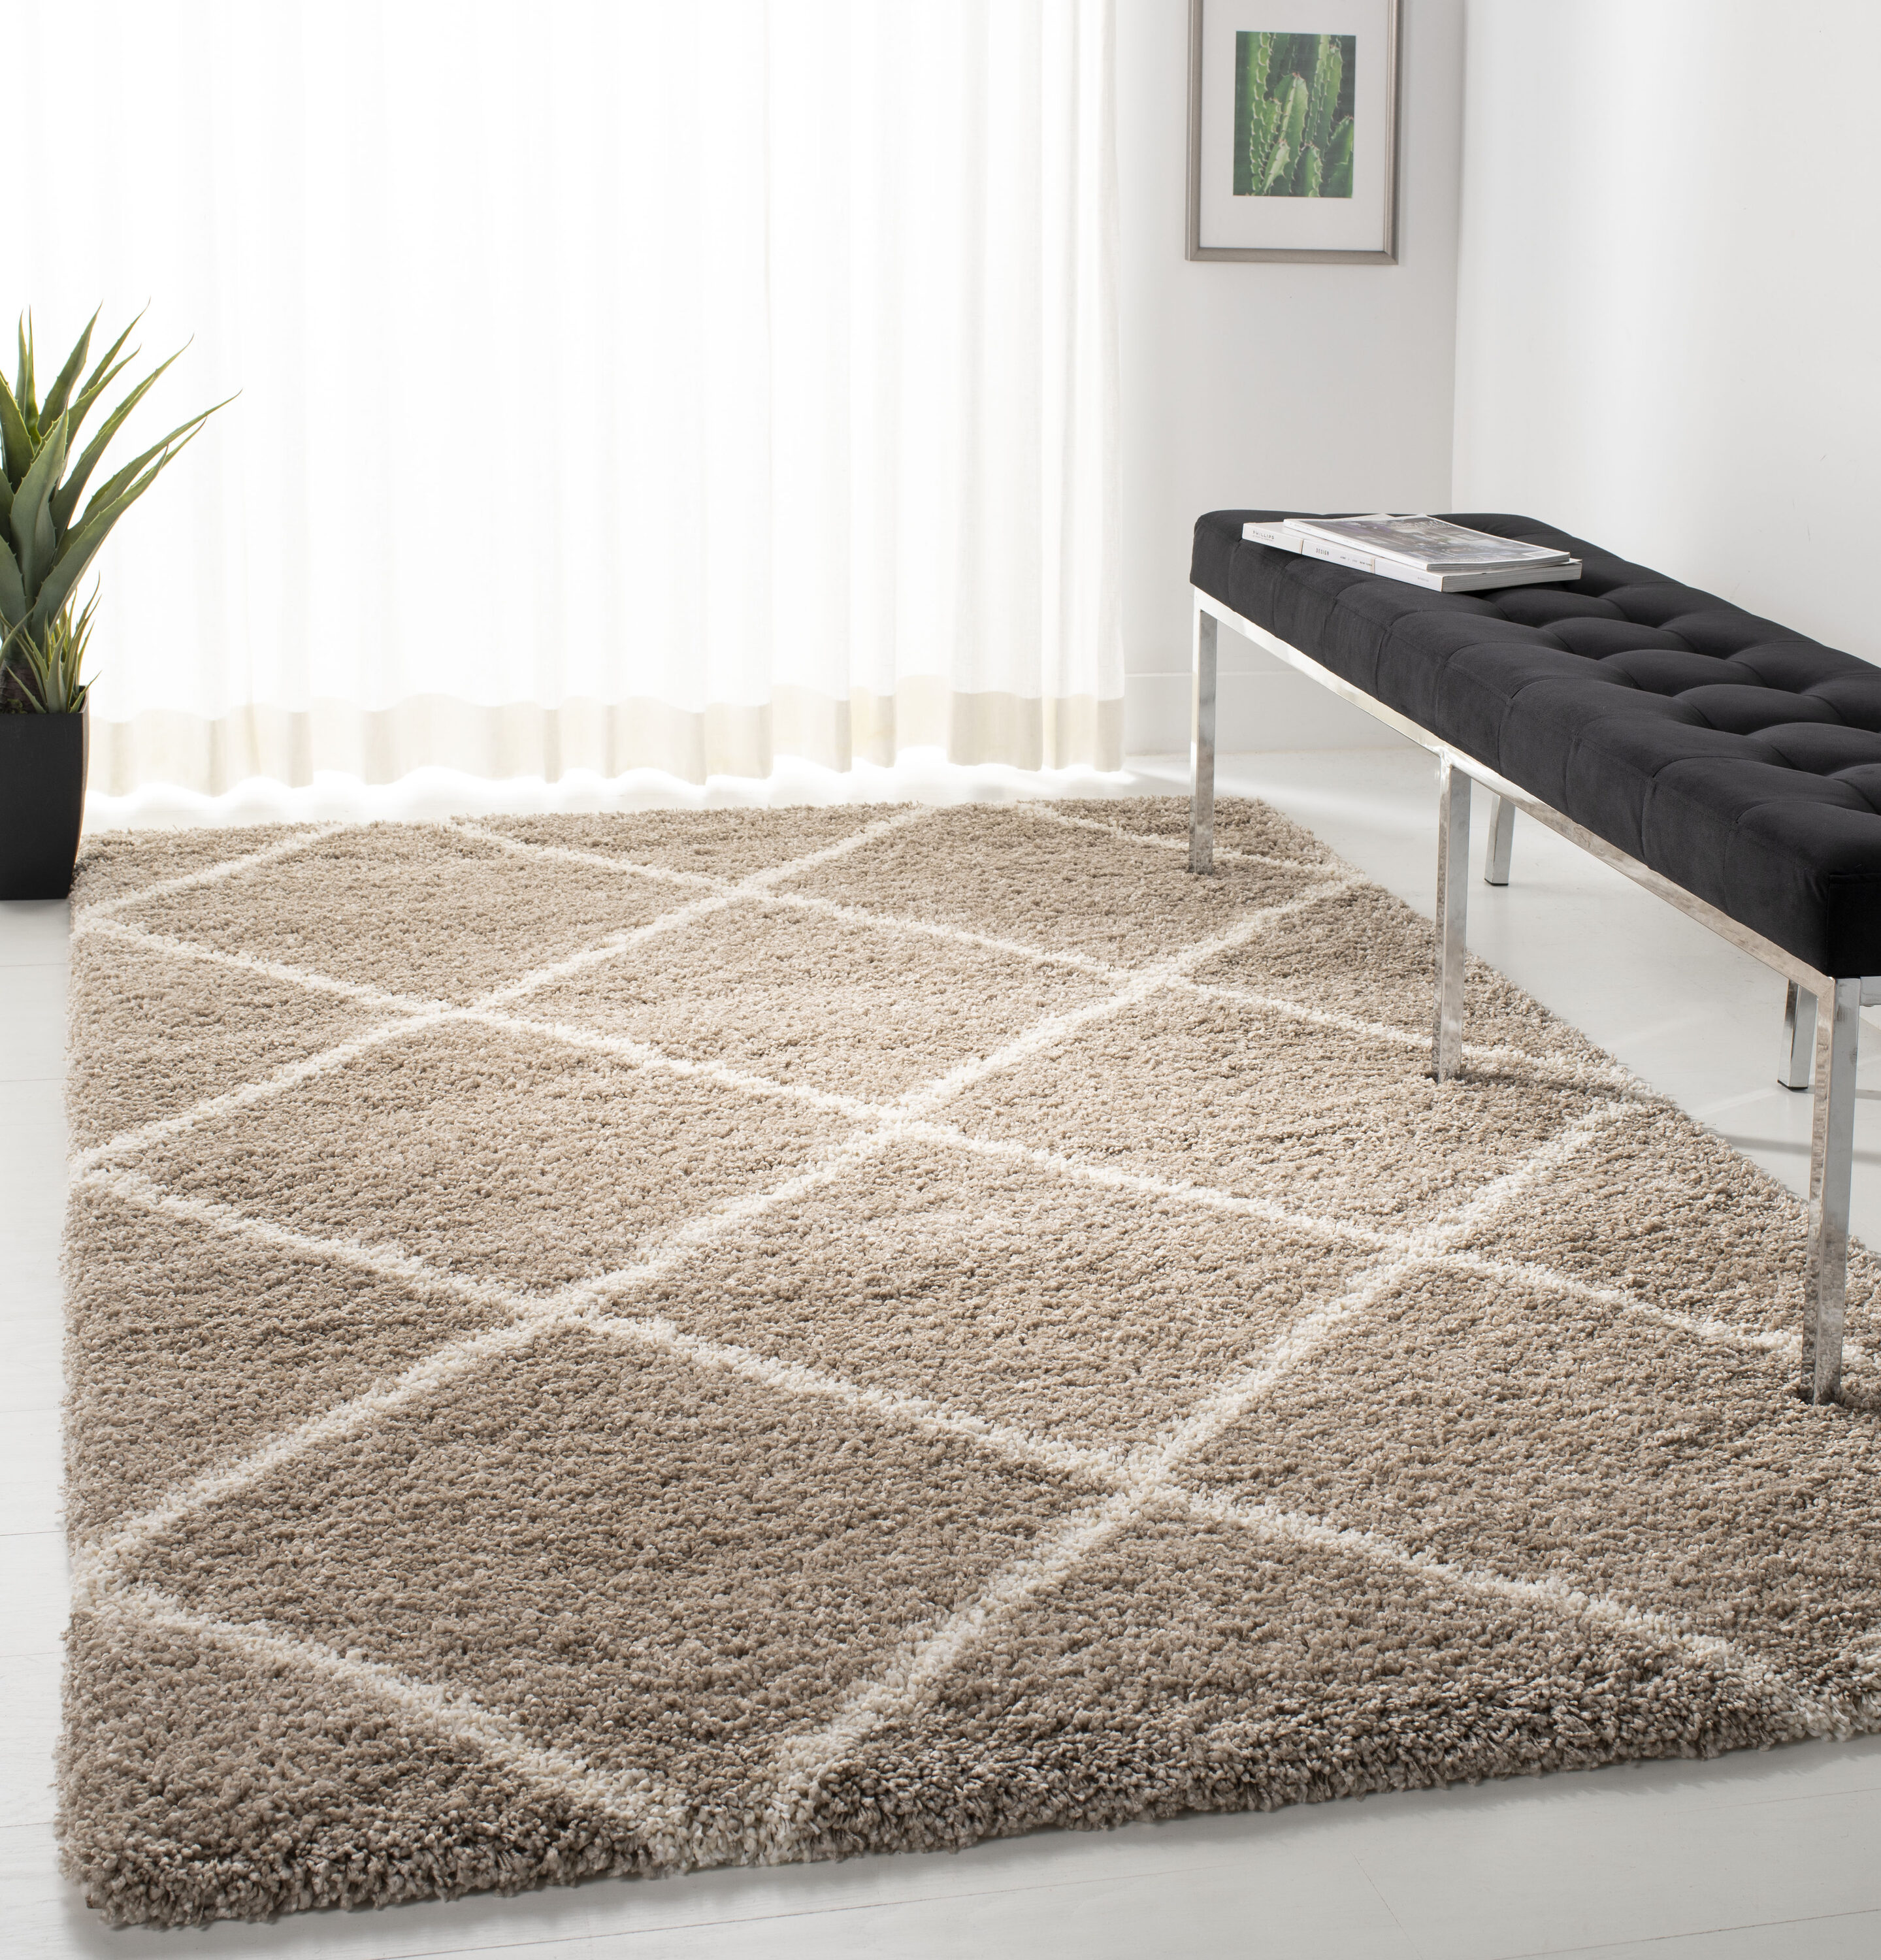 SAFAVIEH Supreme Shag Collection 8' x 10' Beige SGS621C Handmade Solid  1.5-inch Thick Area Rug